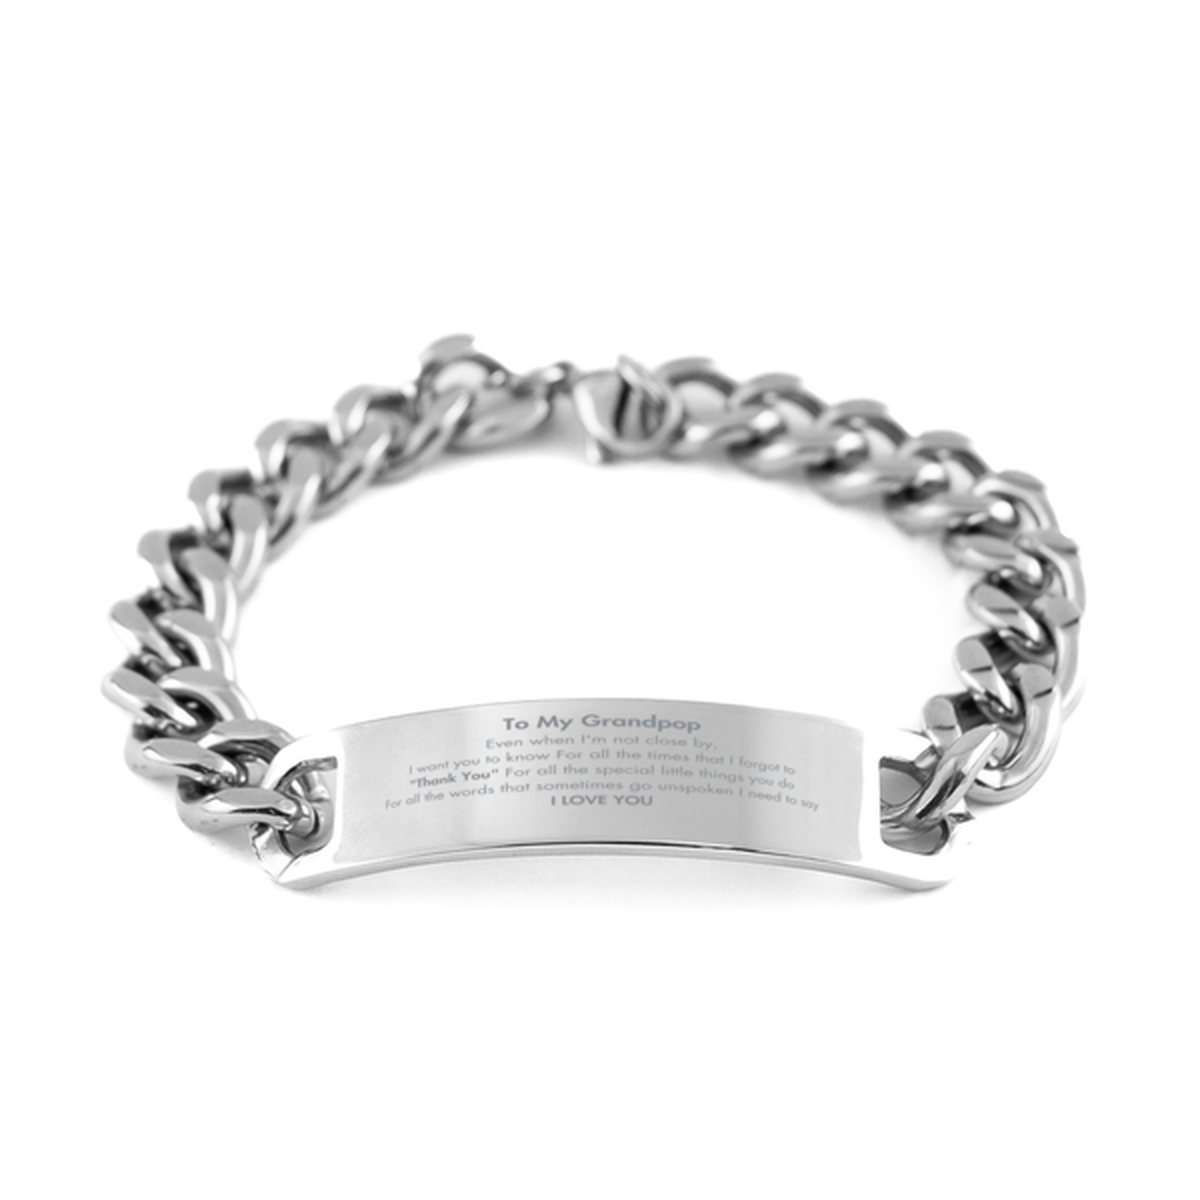 Thank You Gifts for Grandpop, Keepsake Cuban Chain Stainless Steel Bracelet Gifts for Grandpop Birthday Mother's day Father's Day Grandpop For all the words That sometimes go unspoken I need to say I LOVE YOU